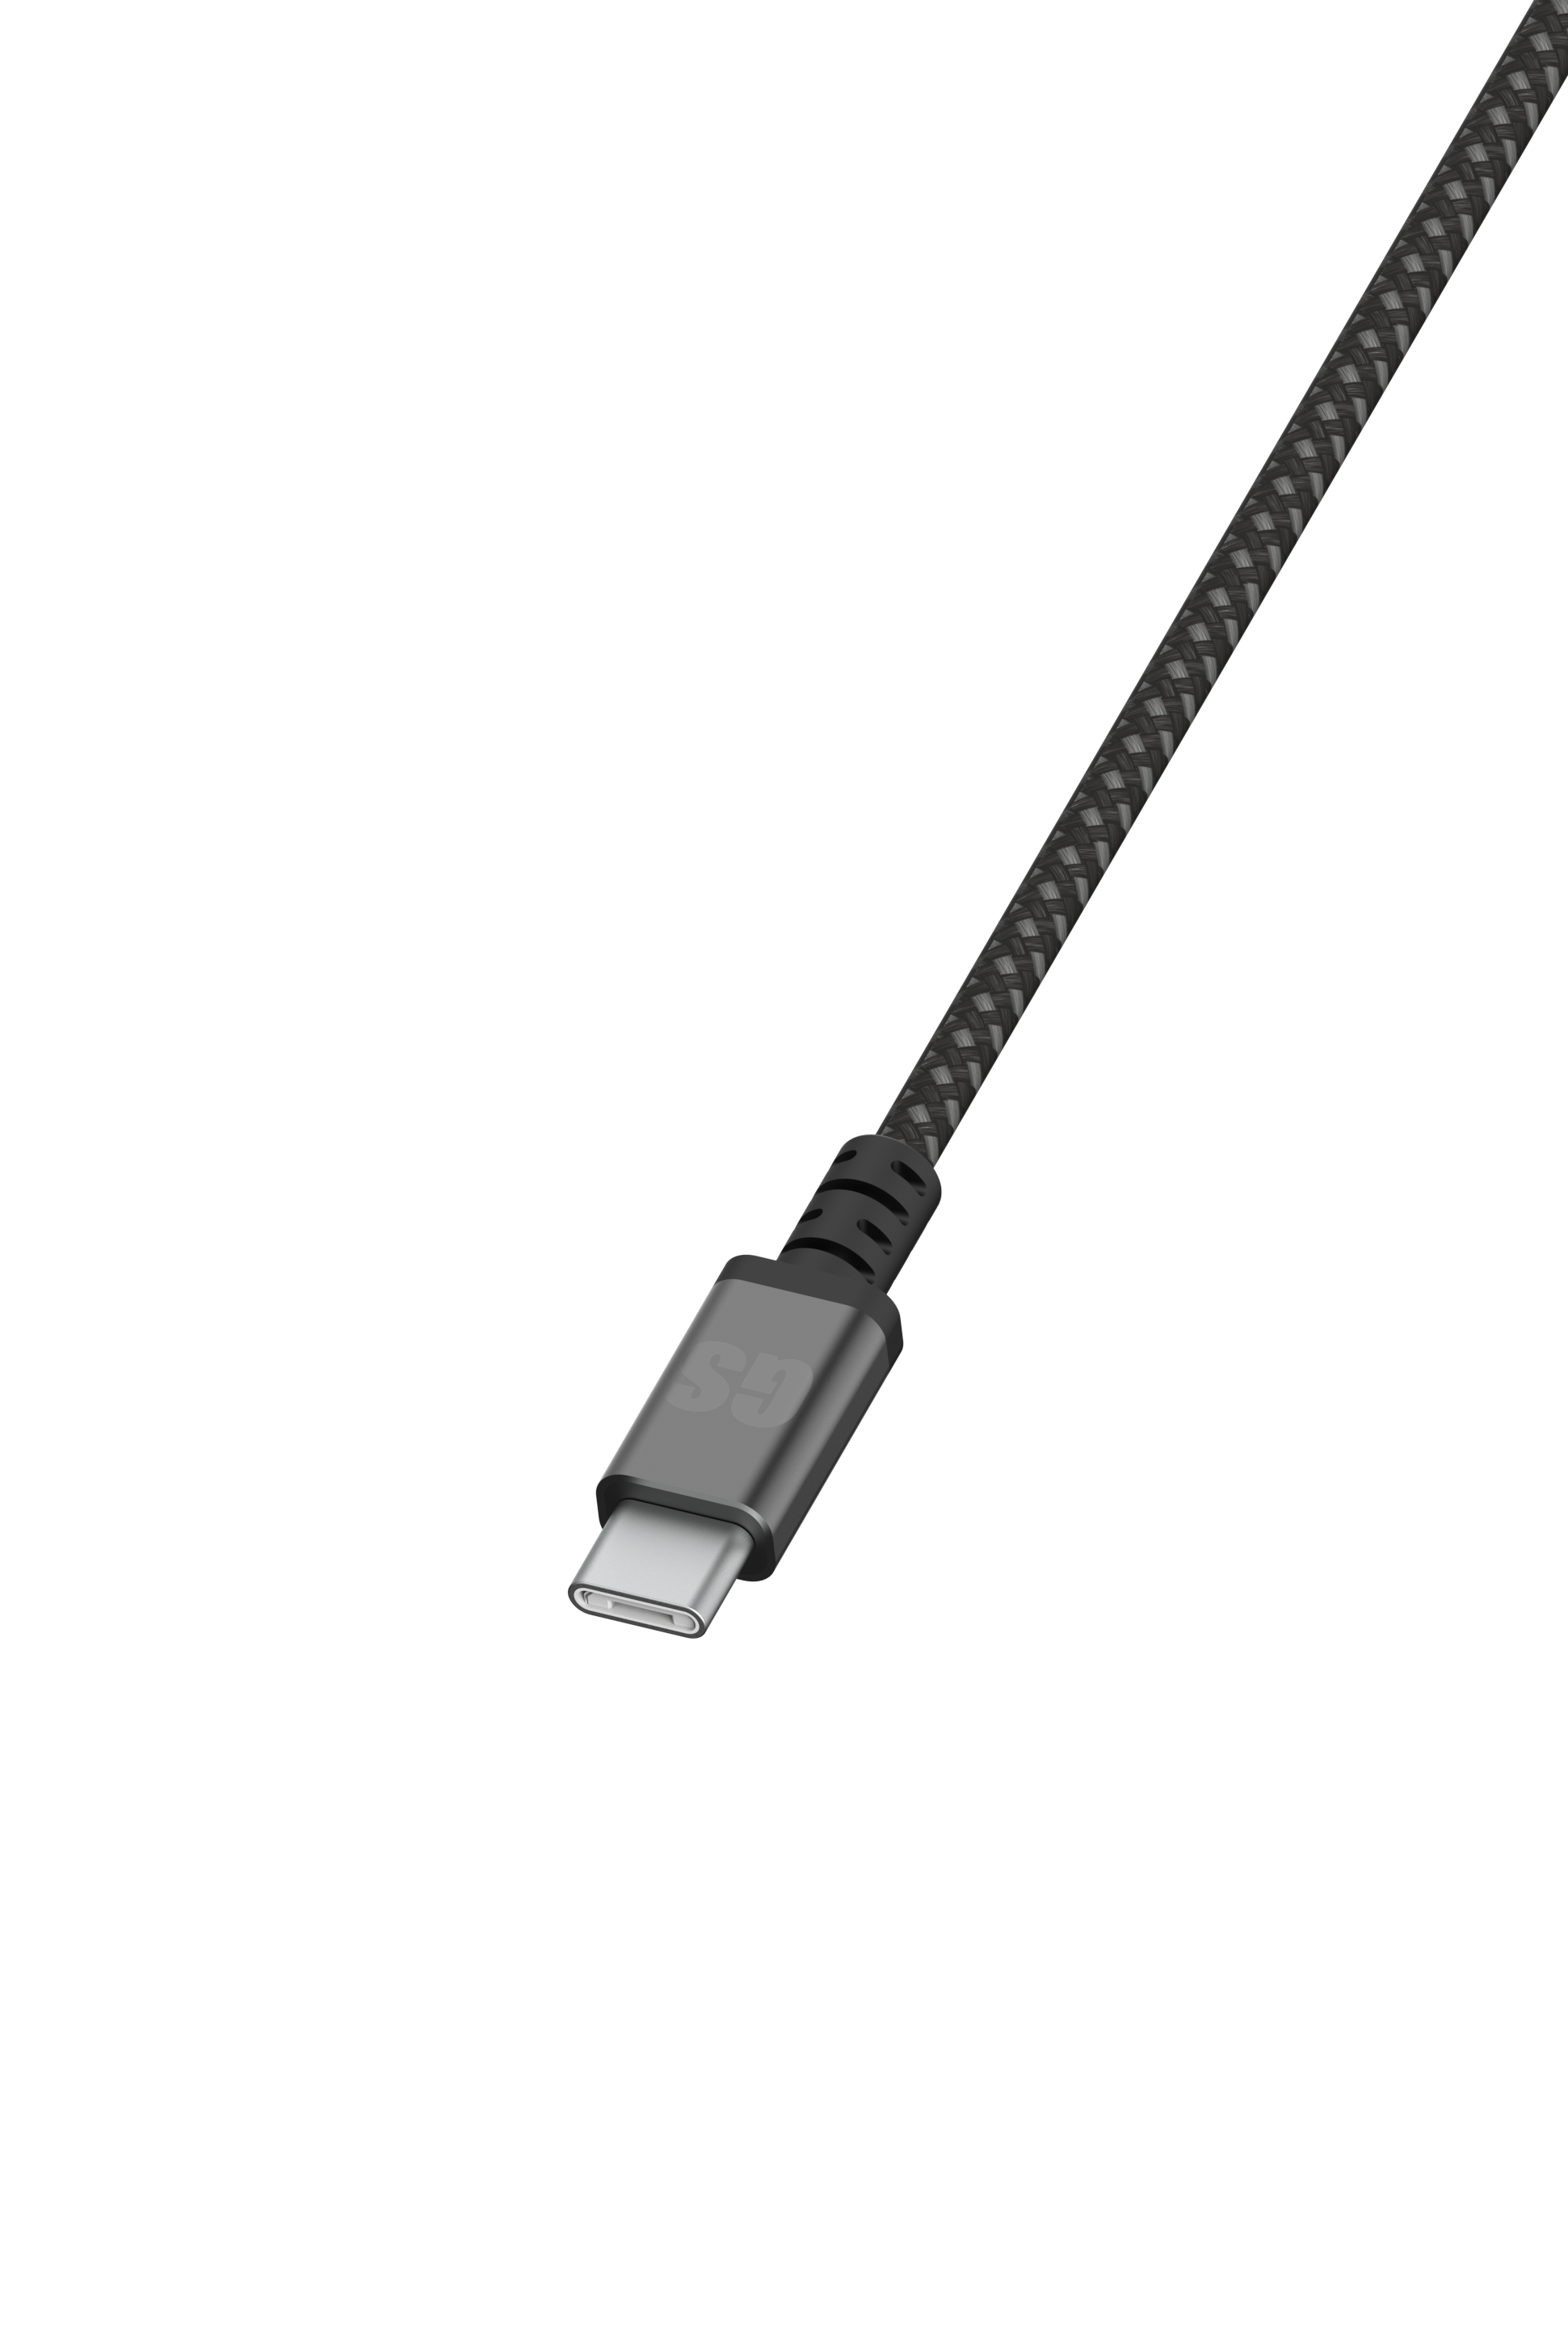 uni USB-C to USB-C Cable [5A] with Braided Nylon (10ft/3 m